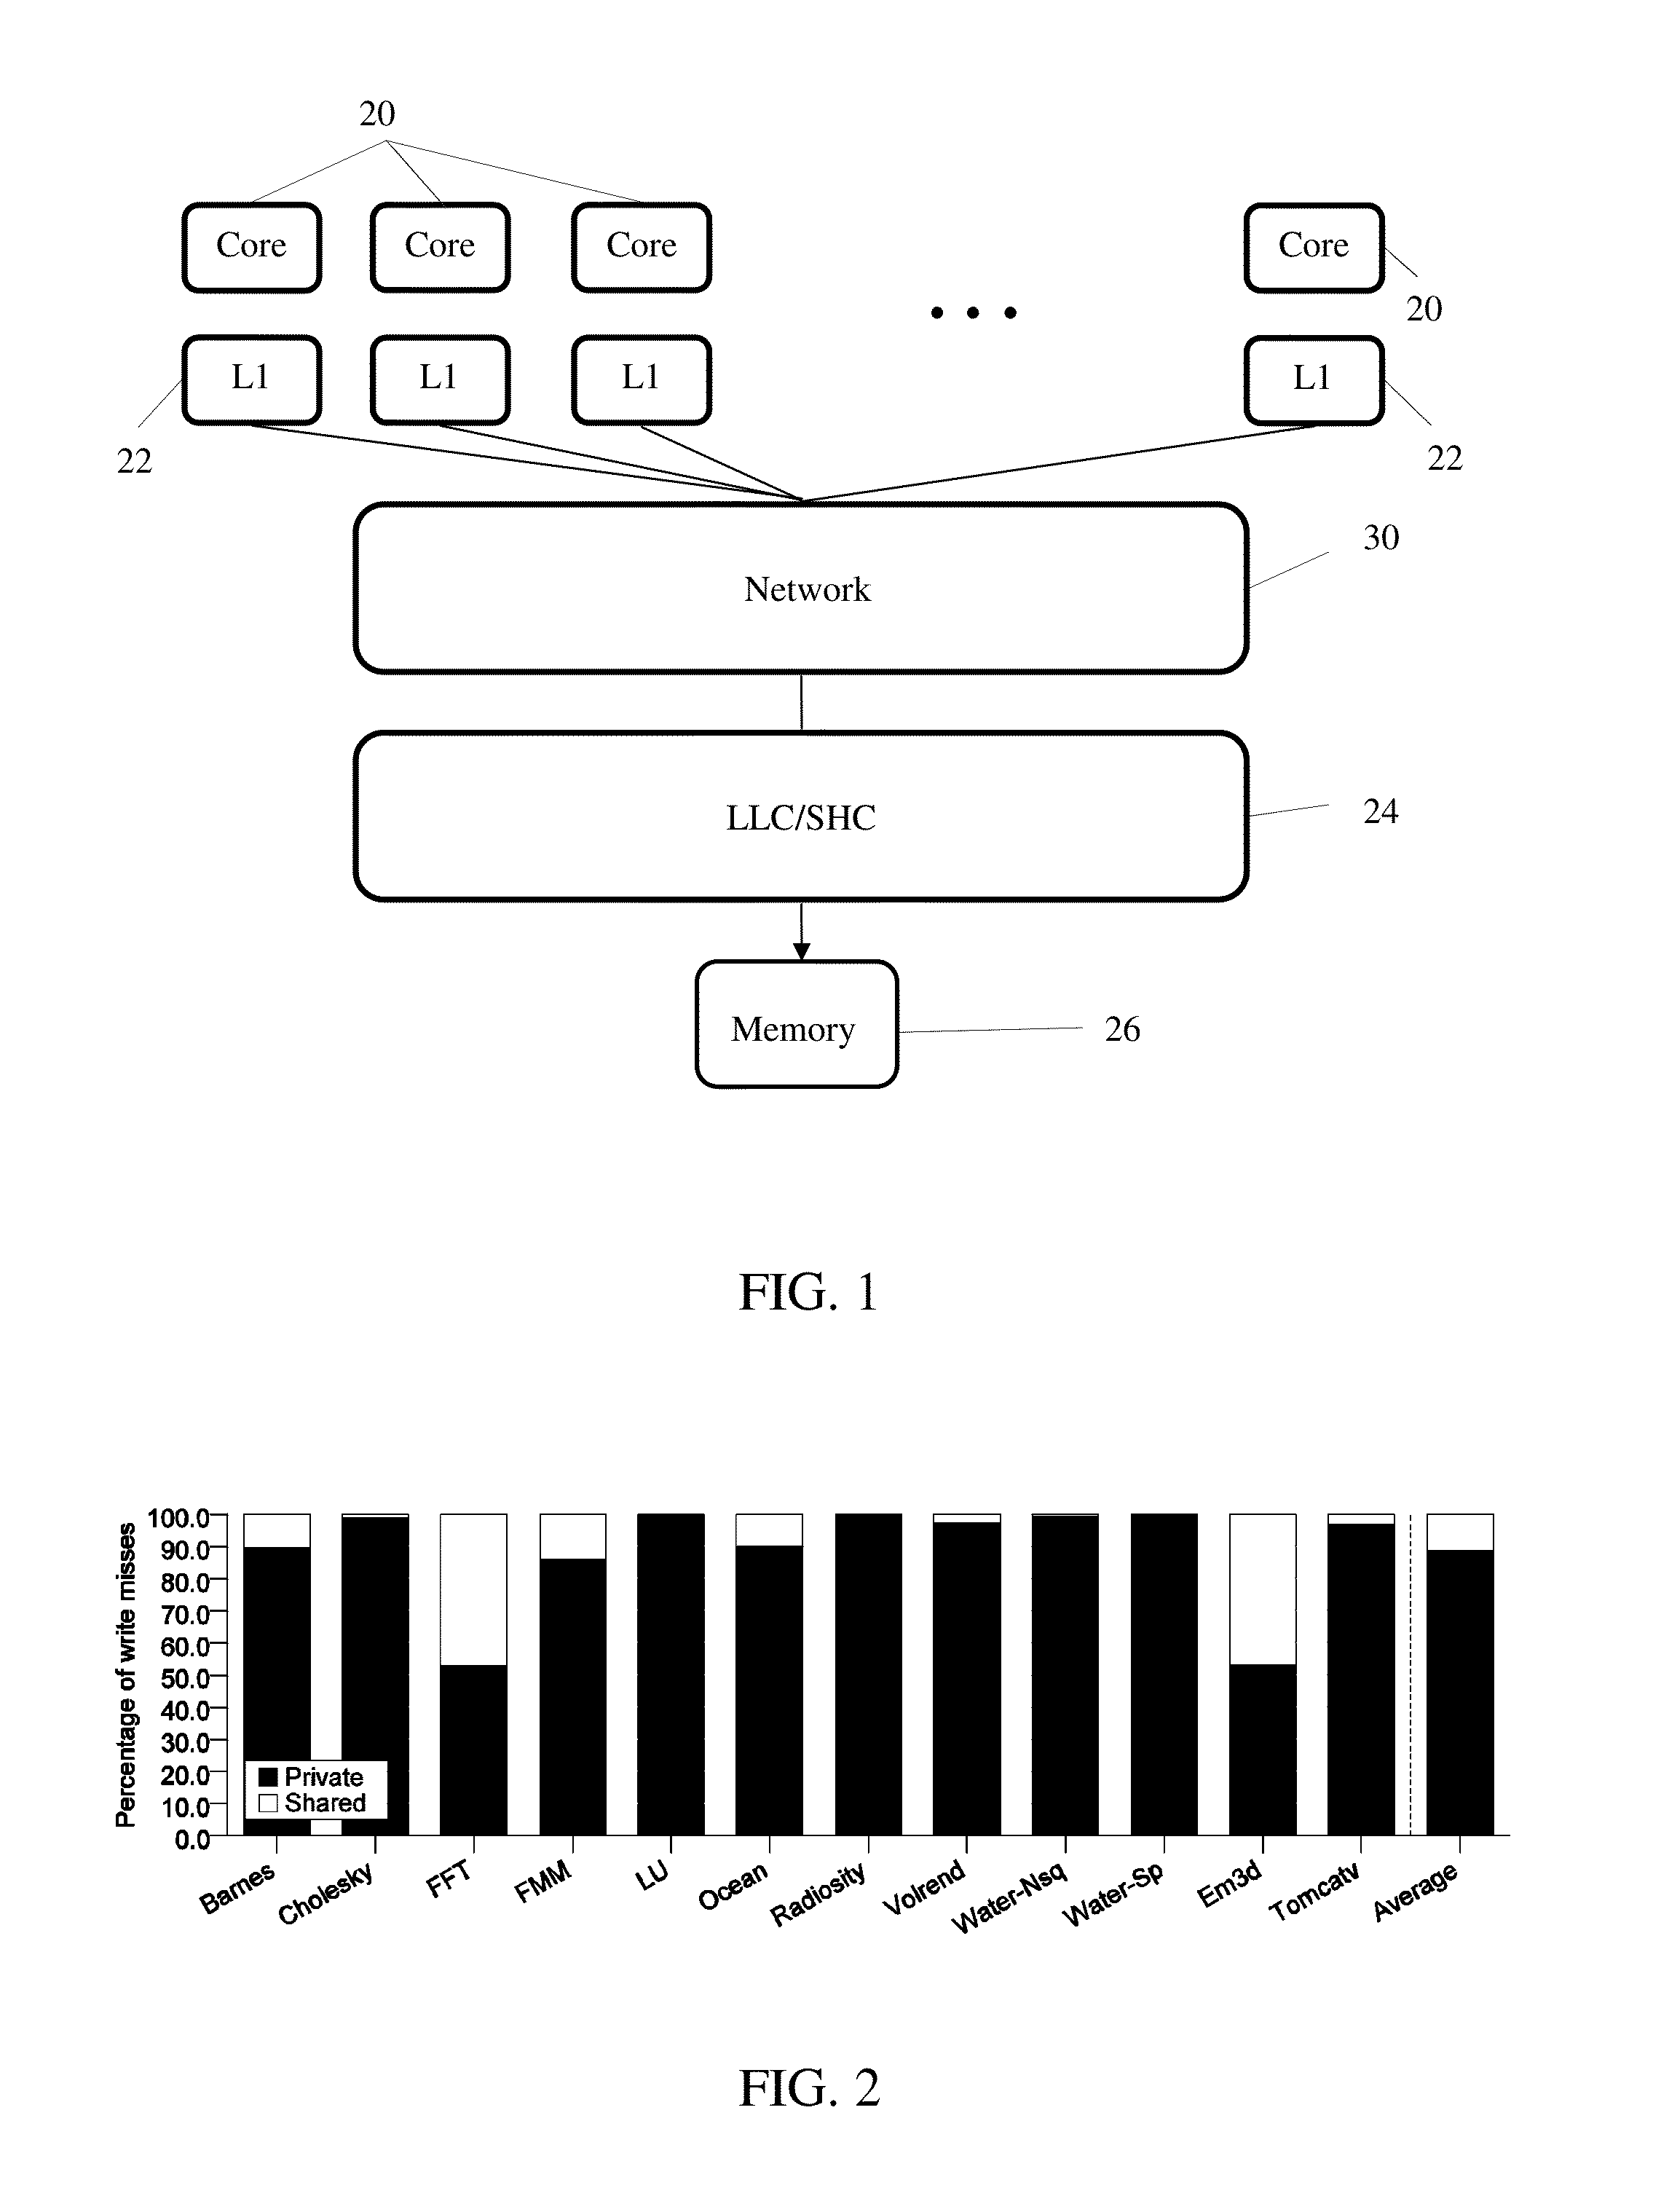 System and method for simplifying cache coherence using multiple write policies